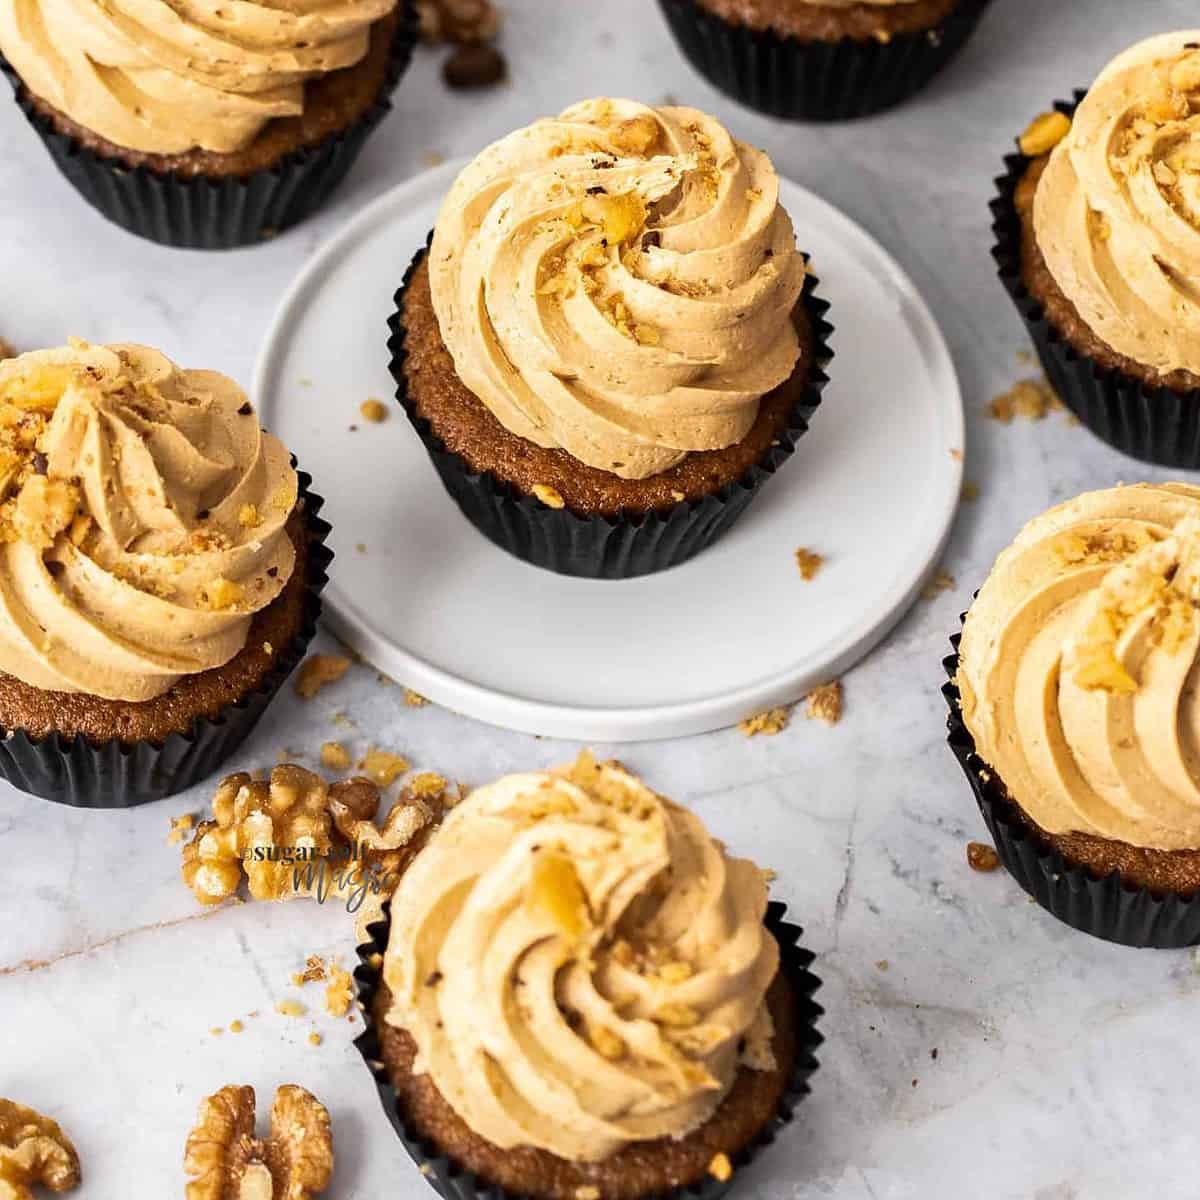  A rich coffee flavor combined with the nuttiness of walnuts make these cupcakes a unique delight.